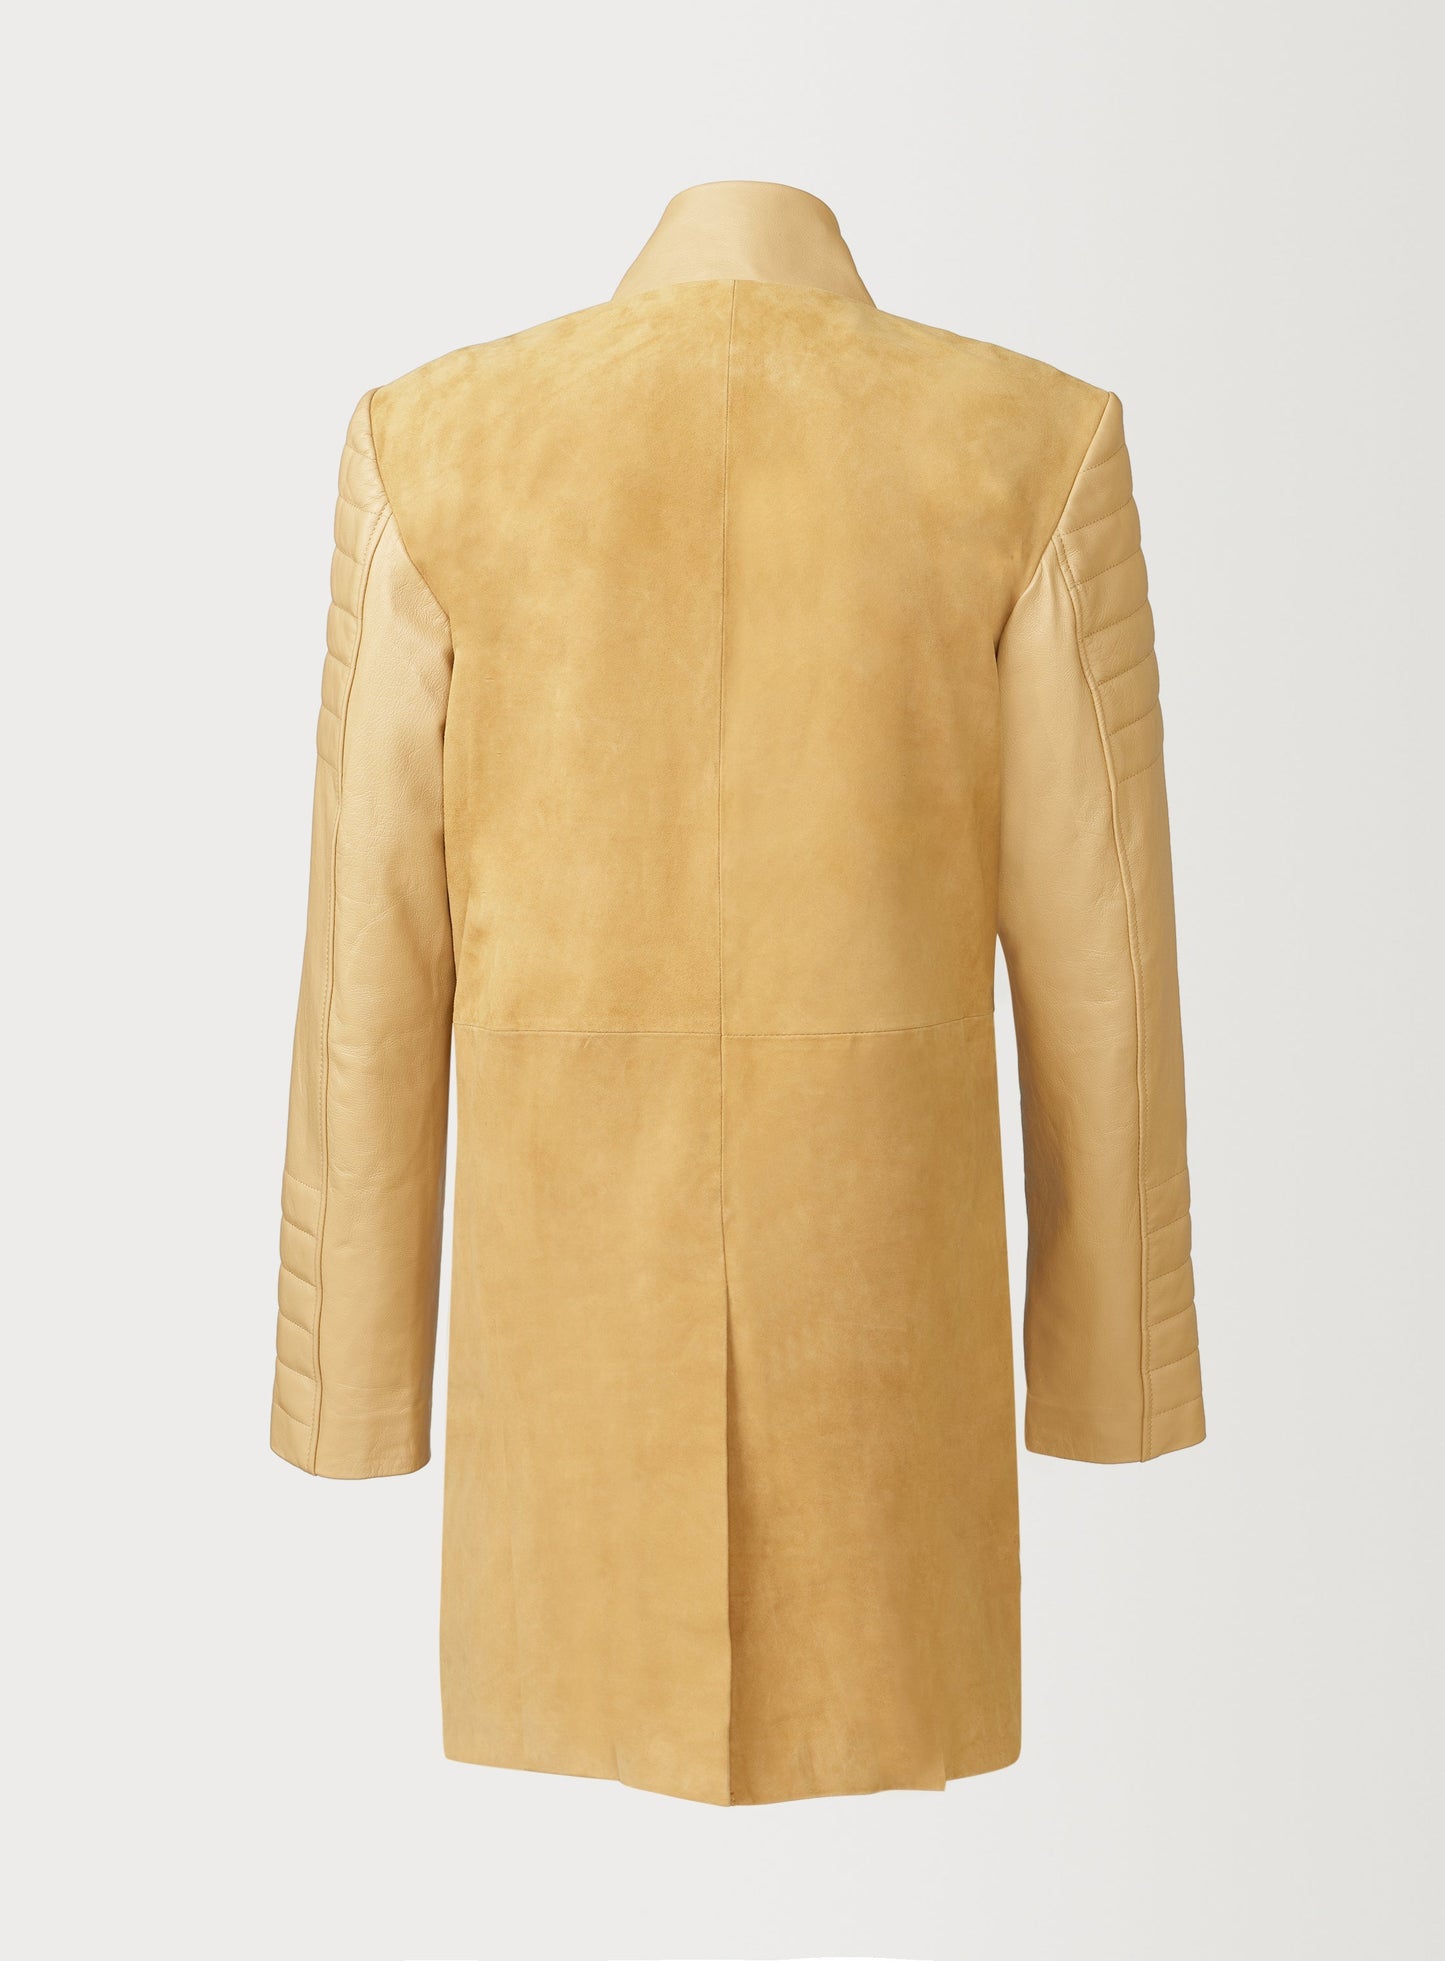 A Beautiful Suede Trench Coat, created by designer brand PRSVR. The PRSVR Lab Coat has a suede Body, and lambskin leather sleeves that show off a padded ribbed design on the shoulder and wrist of the sleeve. 